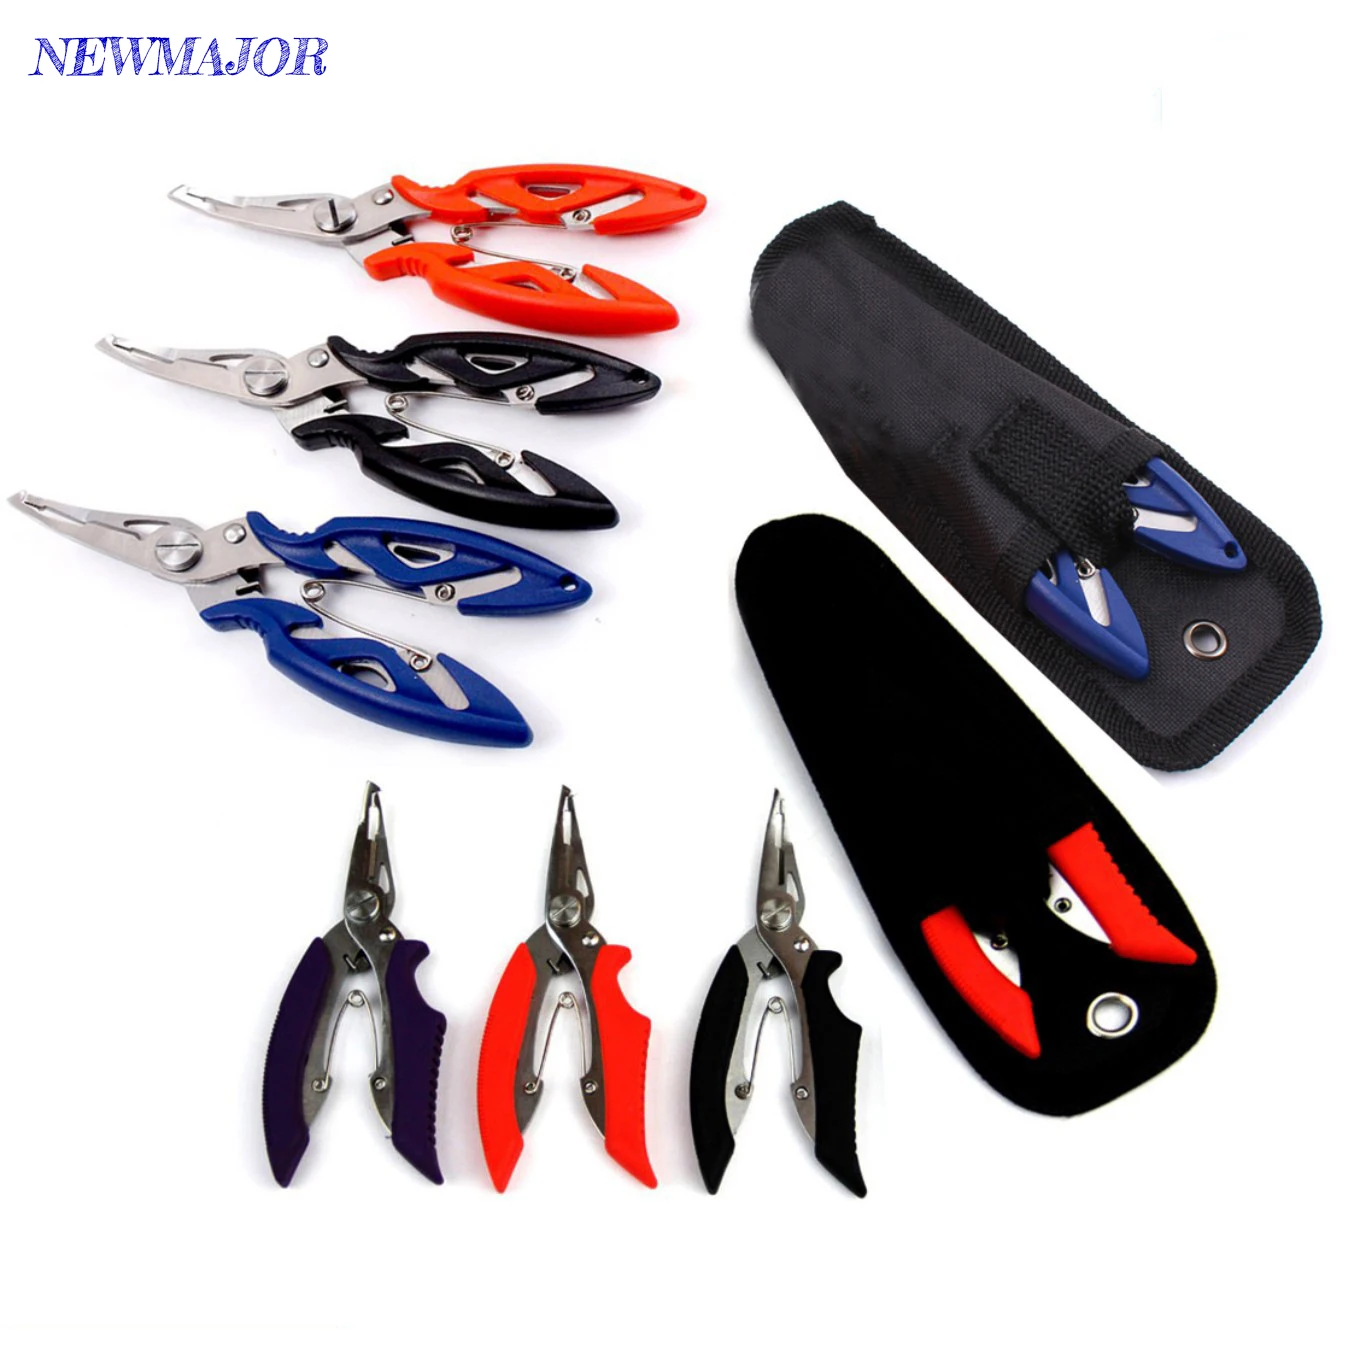 

NEWMAJOR Wholesale 13cm Fishing Pliers Scissor Braid Line Lure Cutter Stainless Steel Fishing Cutting pliers for fishing